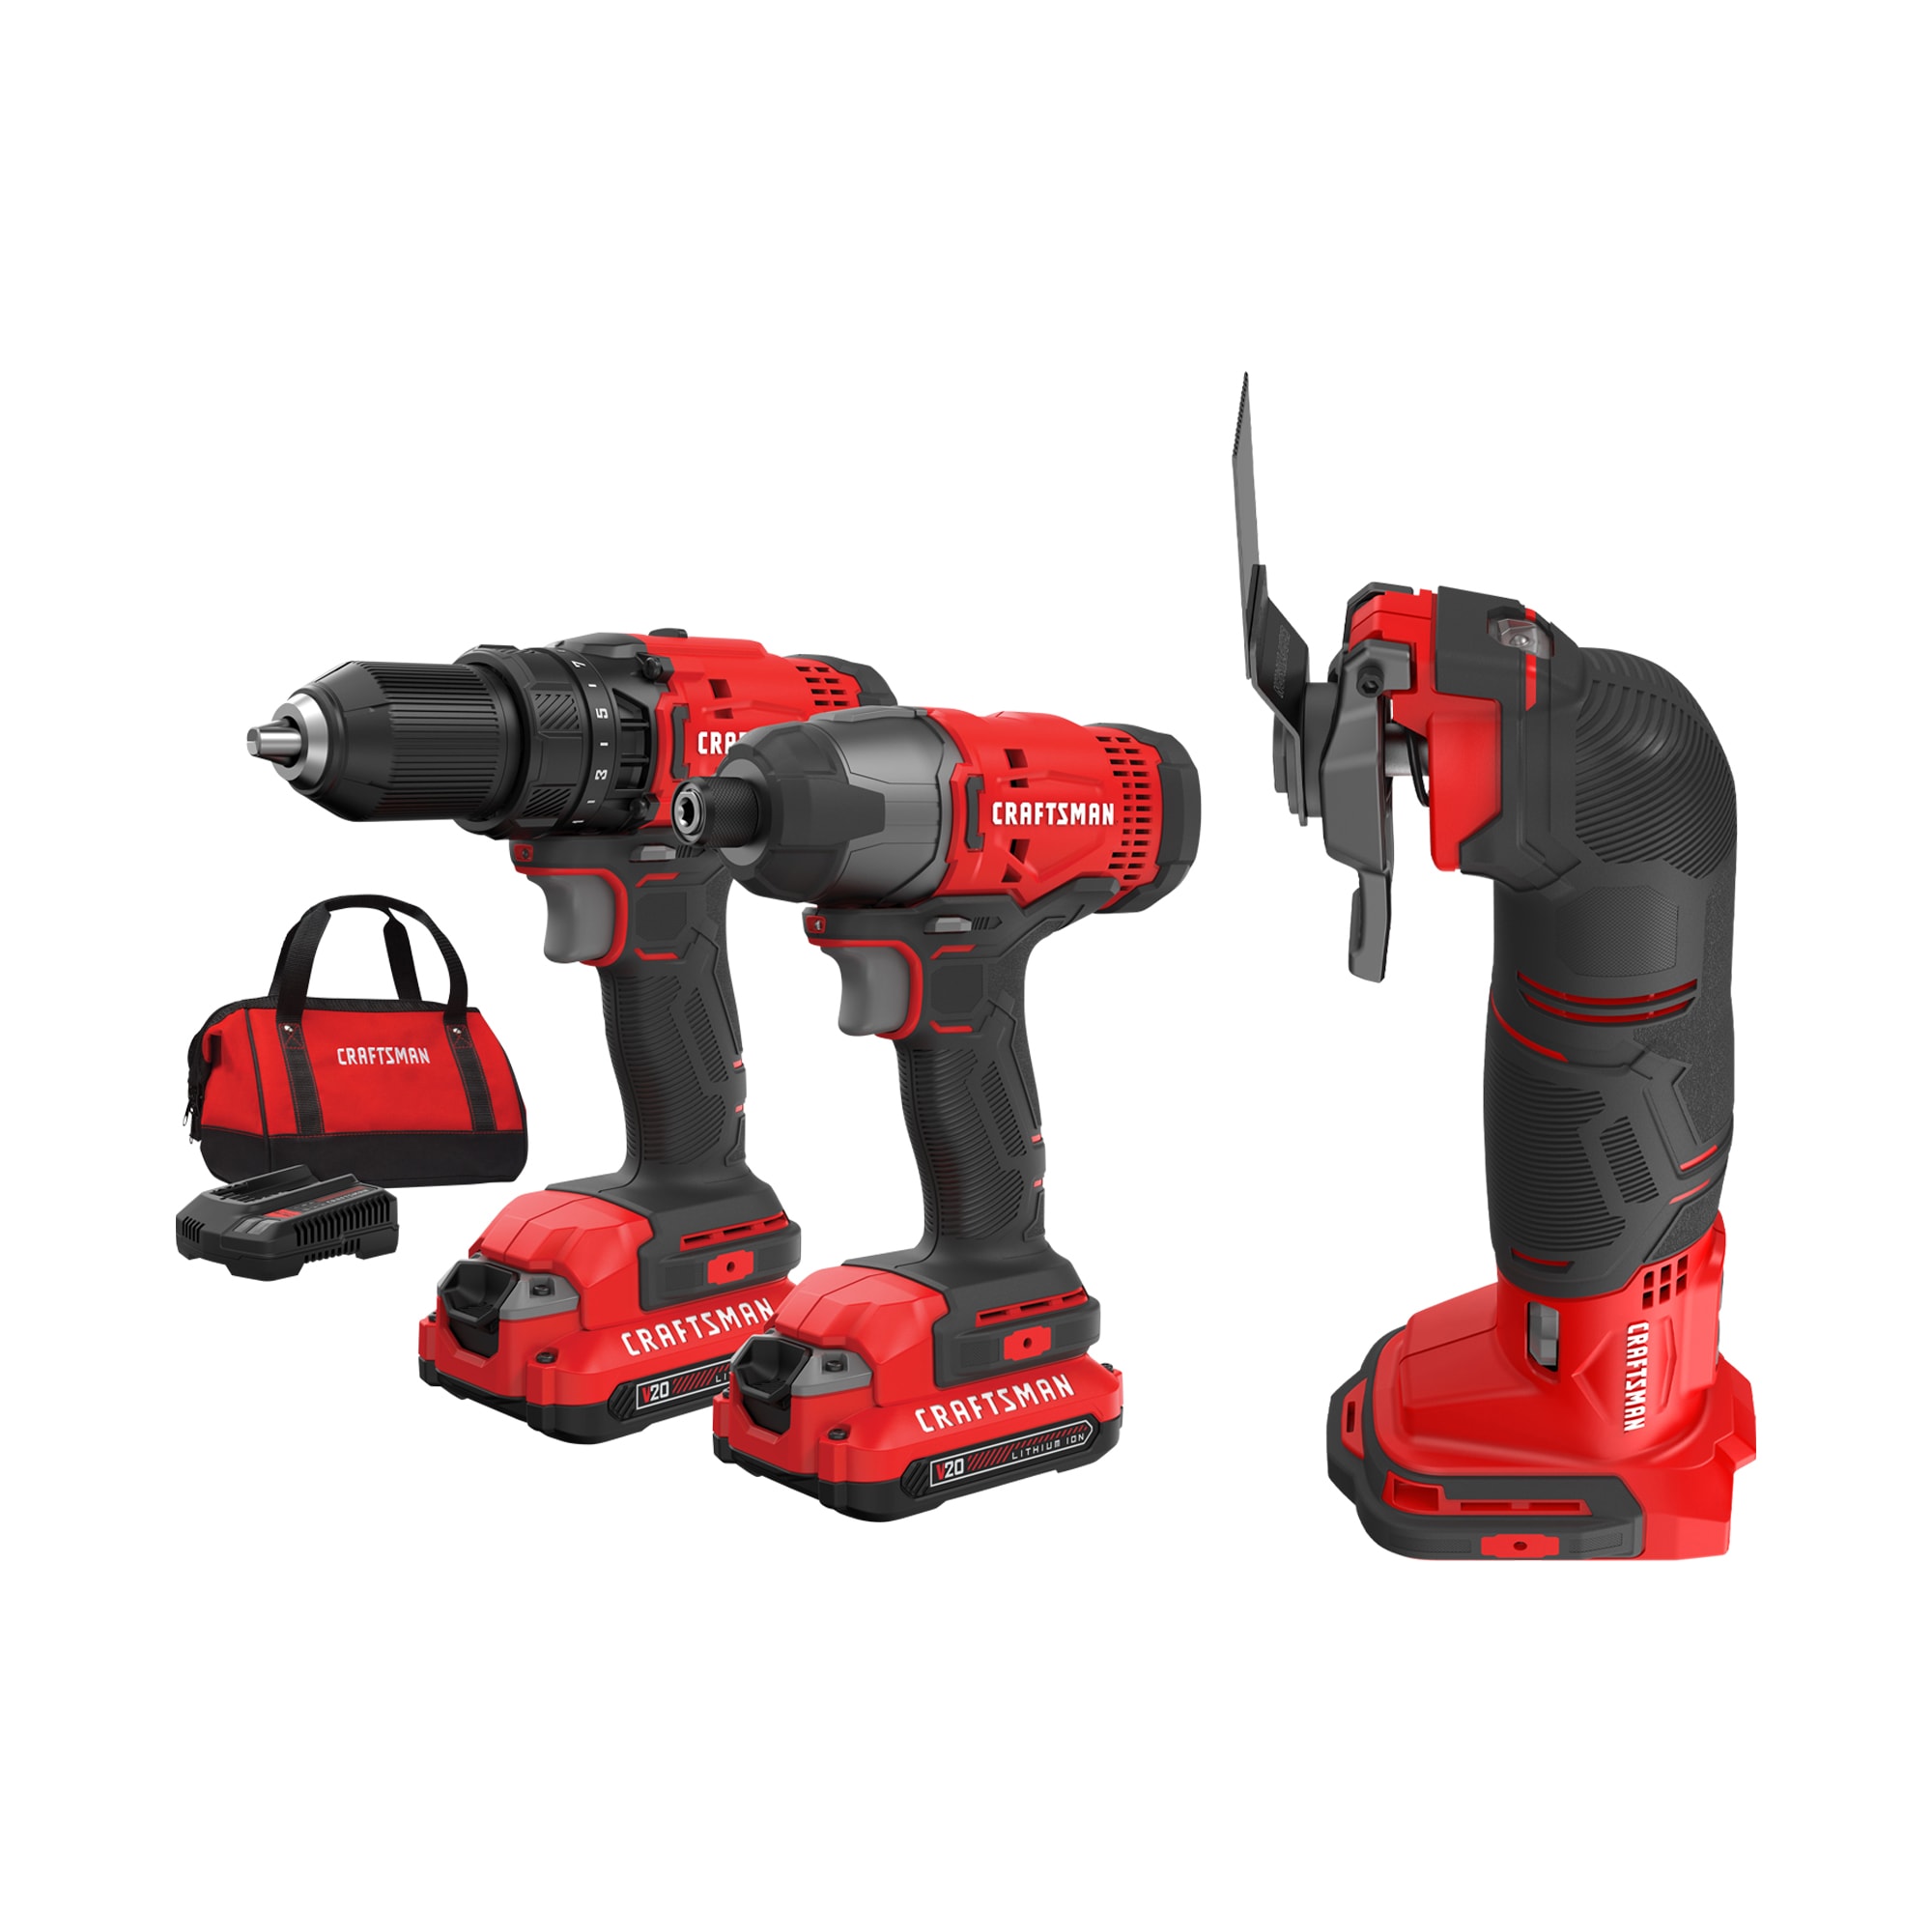 Shop CRAFTSMAN V20* 2-Tool 20-Volt Power Tool Combo Kit with Soft Case  (2-Batteries Included and Charger Included)  V20* 12-Piece 20-volt  Variable Speed Oscillating Multi-Tool Kit at